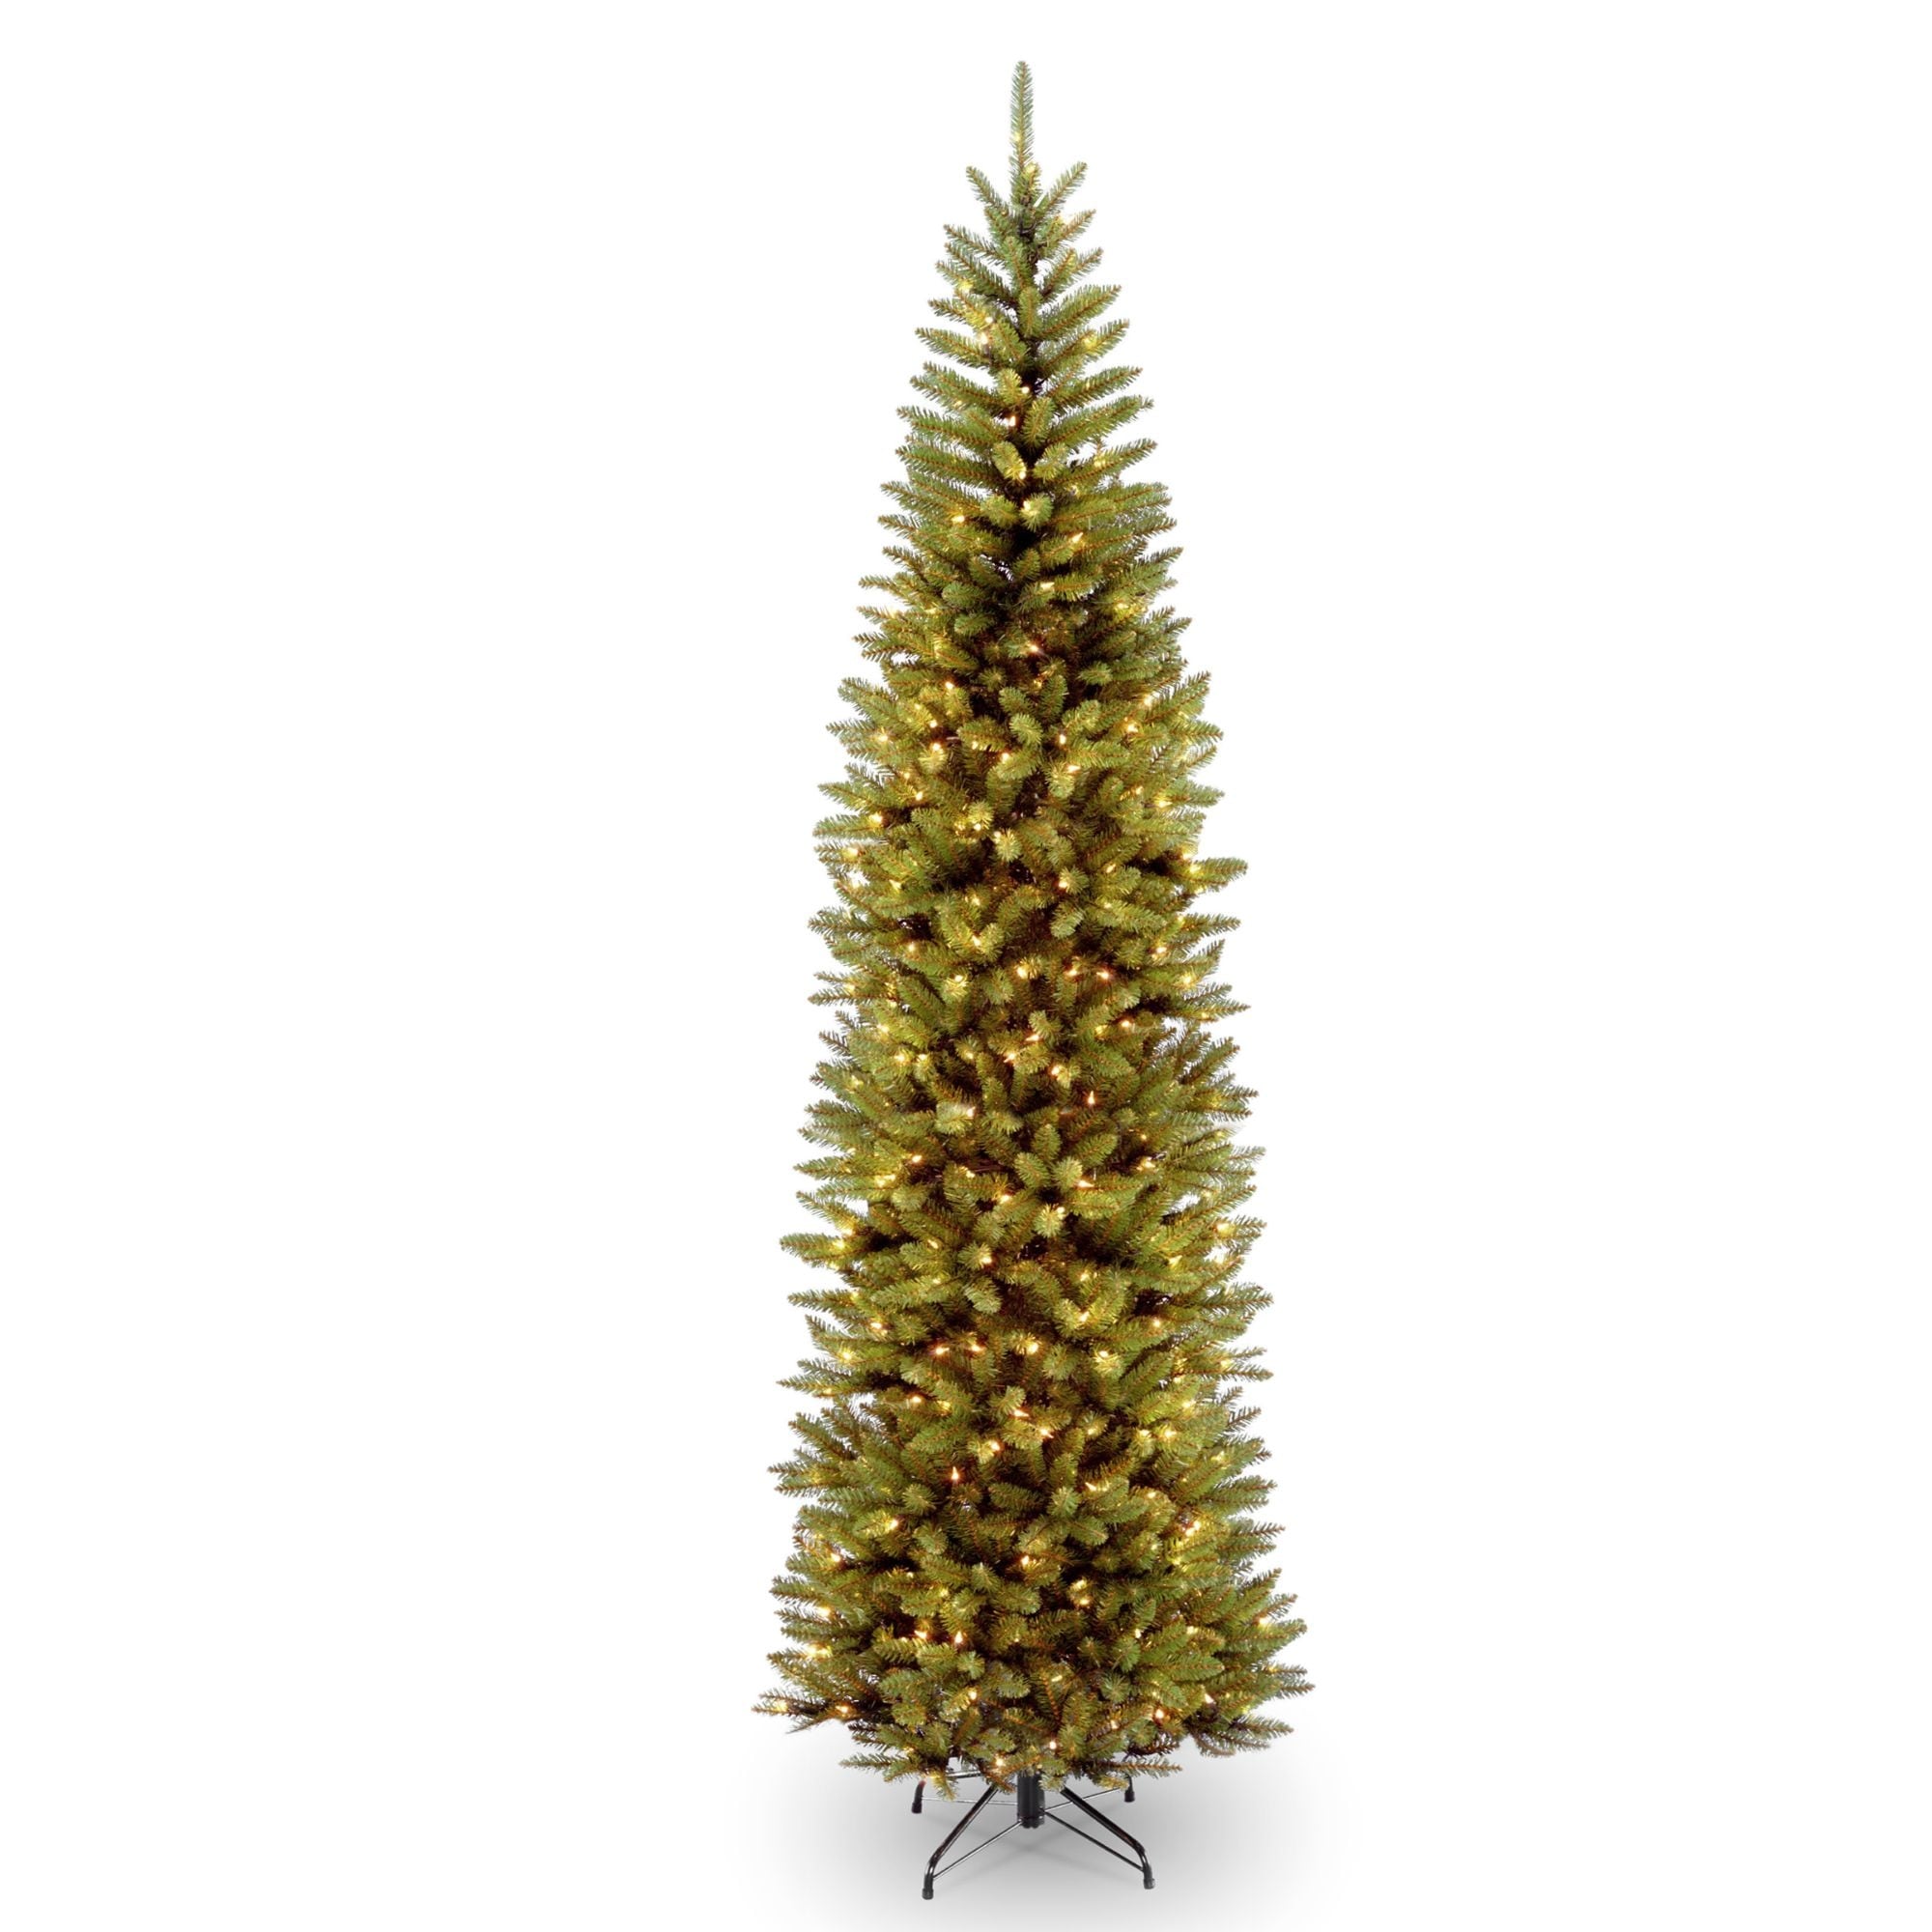 9' Kingswood Fir Pencil Artificial Christmas Tree -Clear Lights - 9 Foot